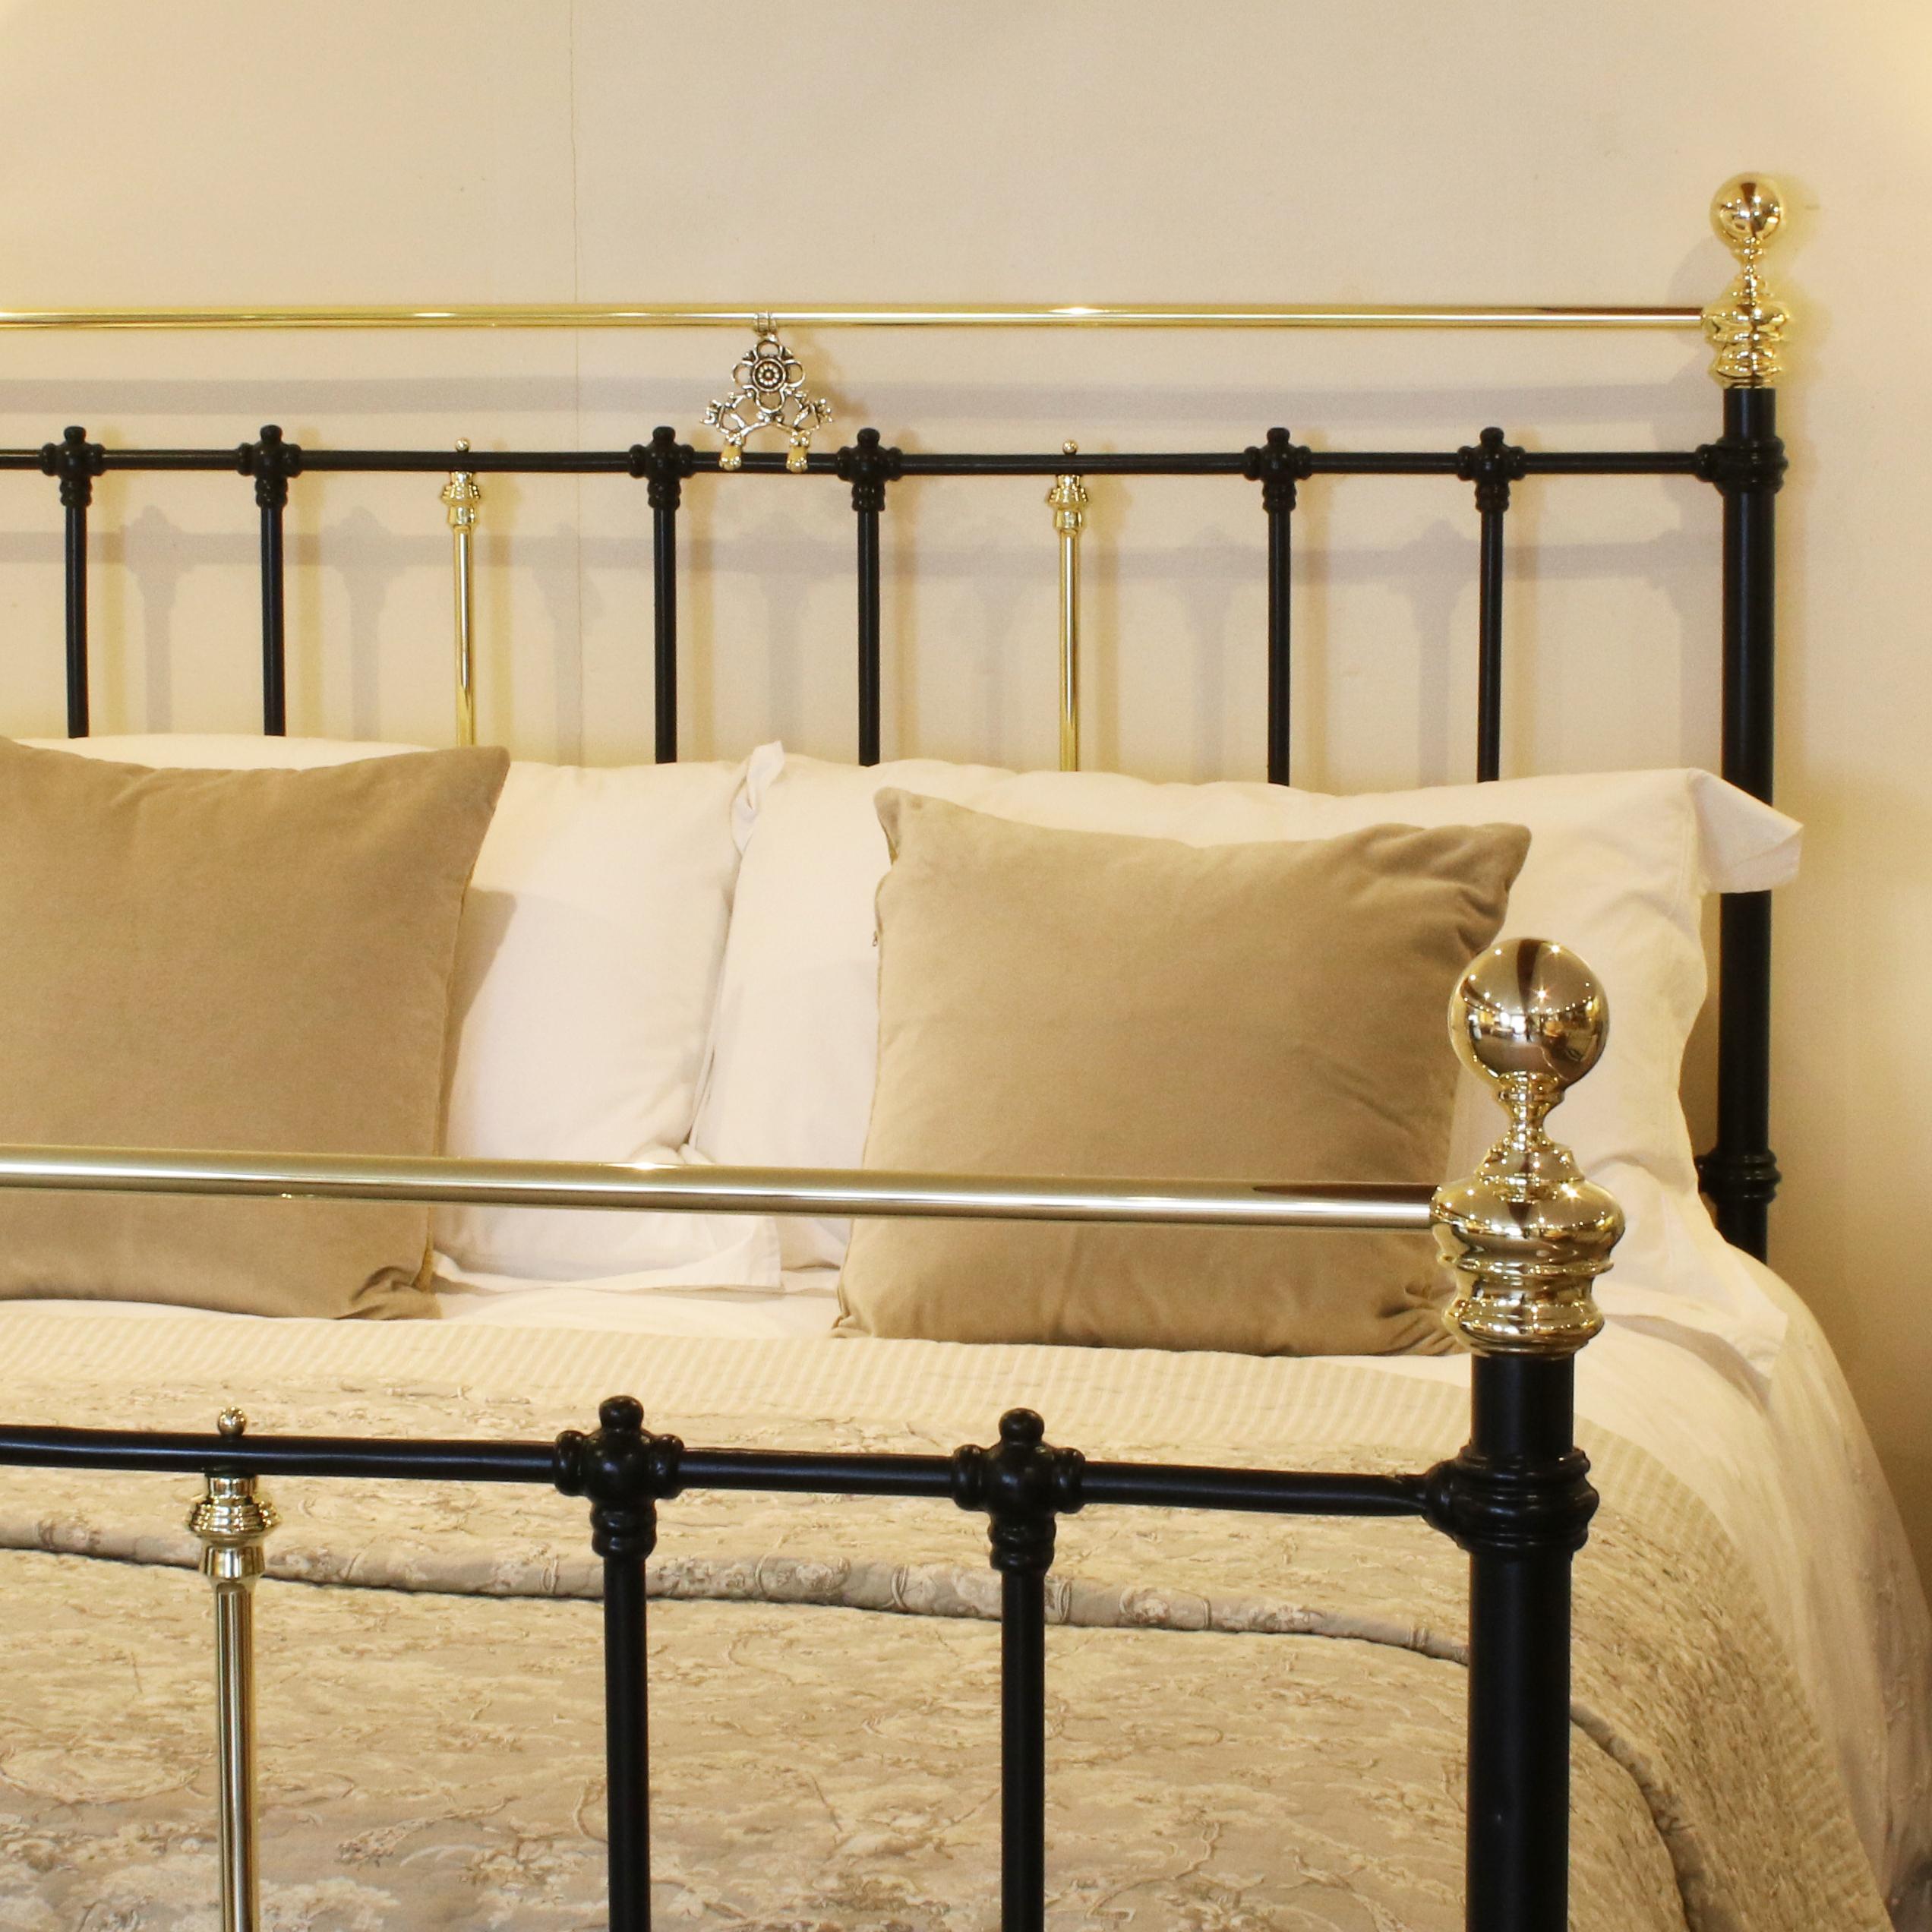 5ft black bed with straight brass top-rail and decorative brass castings.

This bed accepts a British King Size or American Queen Size (5ft wide, 60 inches or 150cm) base and mattress set.

The price is for the bed frame alone. The base, mattress,